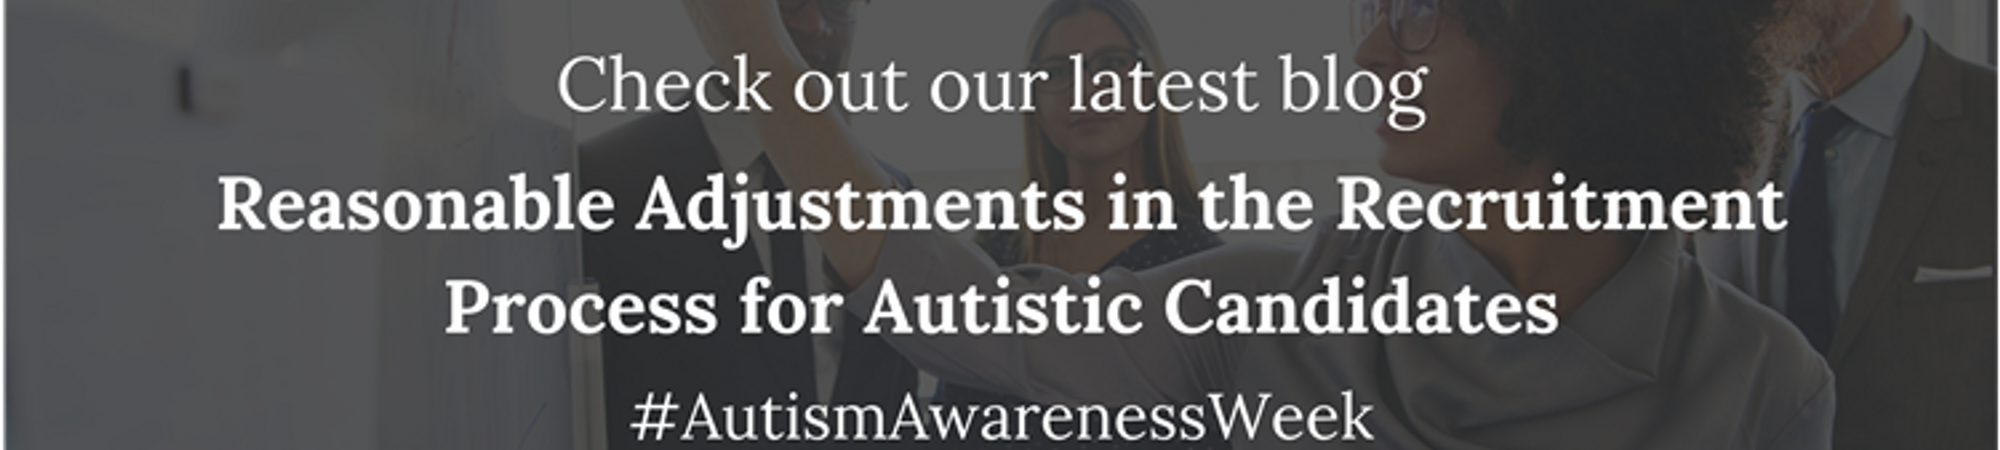 Reasonable Adjustments In The Recruitment Process For Autistic Candidates